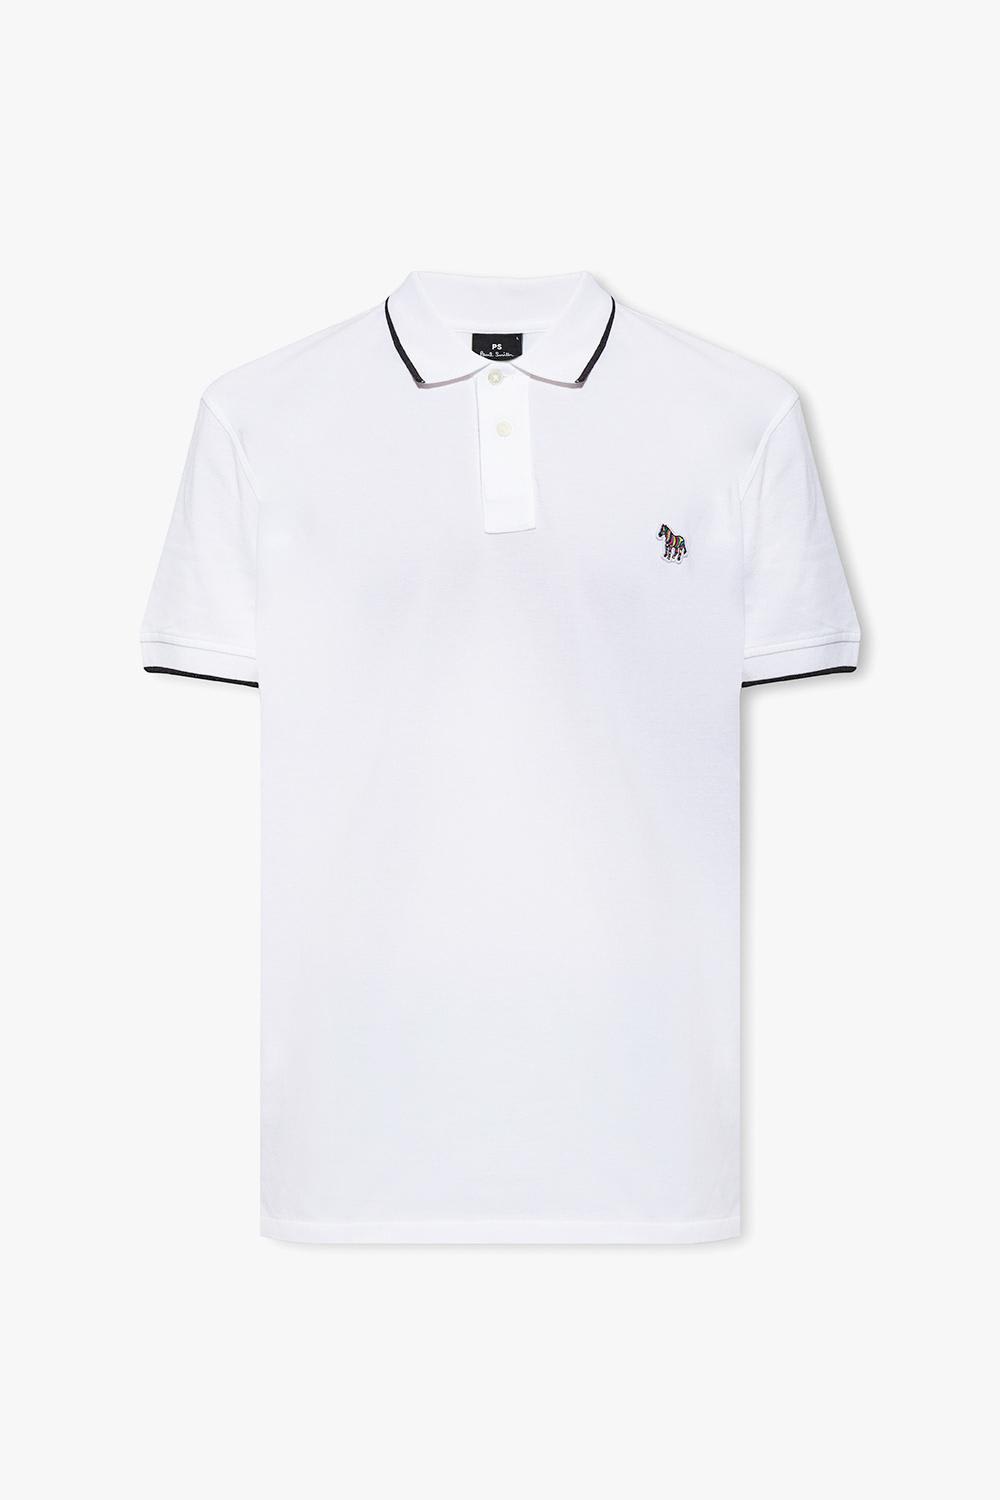 PS BY PAUL SMITH POLO SHIRT WITH ZEBRA MOTIF